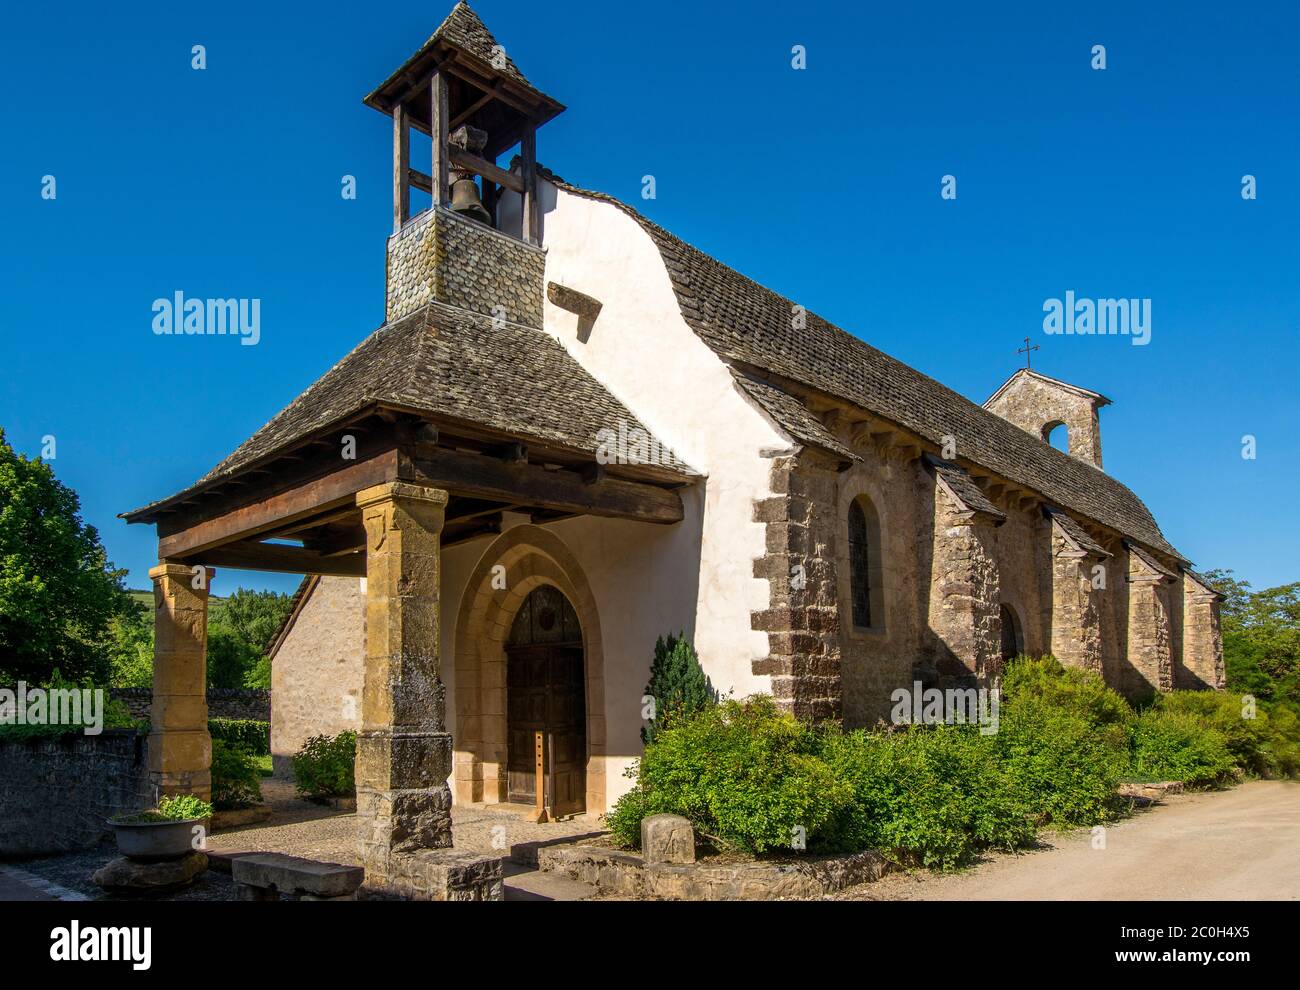 Chapel of the White Penitents, Saint-Come-d'Olt, village labeled one of The Most Beautiful Villages of France, Aveyron, Occitanie, France Stock Photo